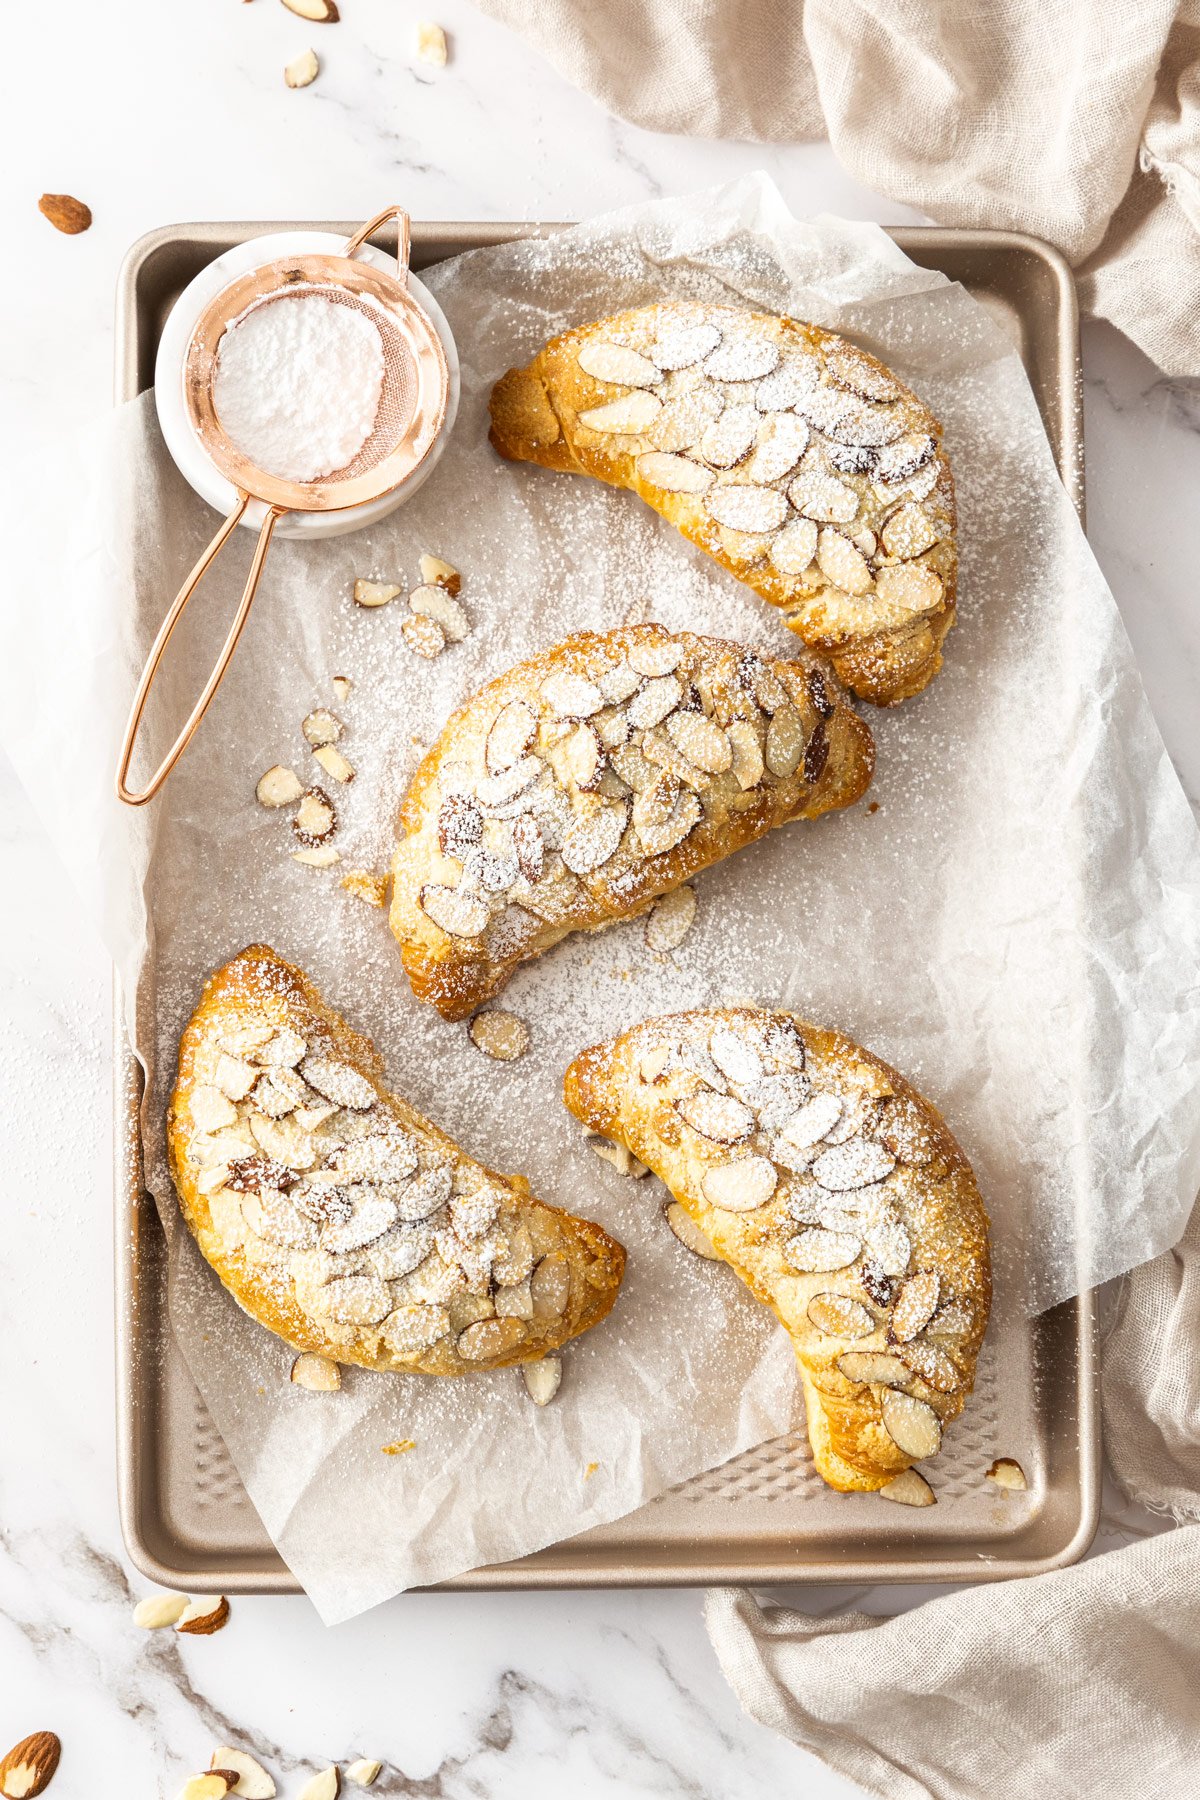 Four Almond Croissants, dusted with powdered sugar, sitting on some baking paper on a gold baking tray.